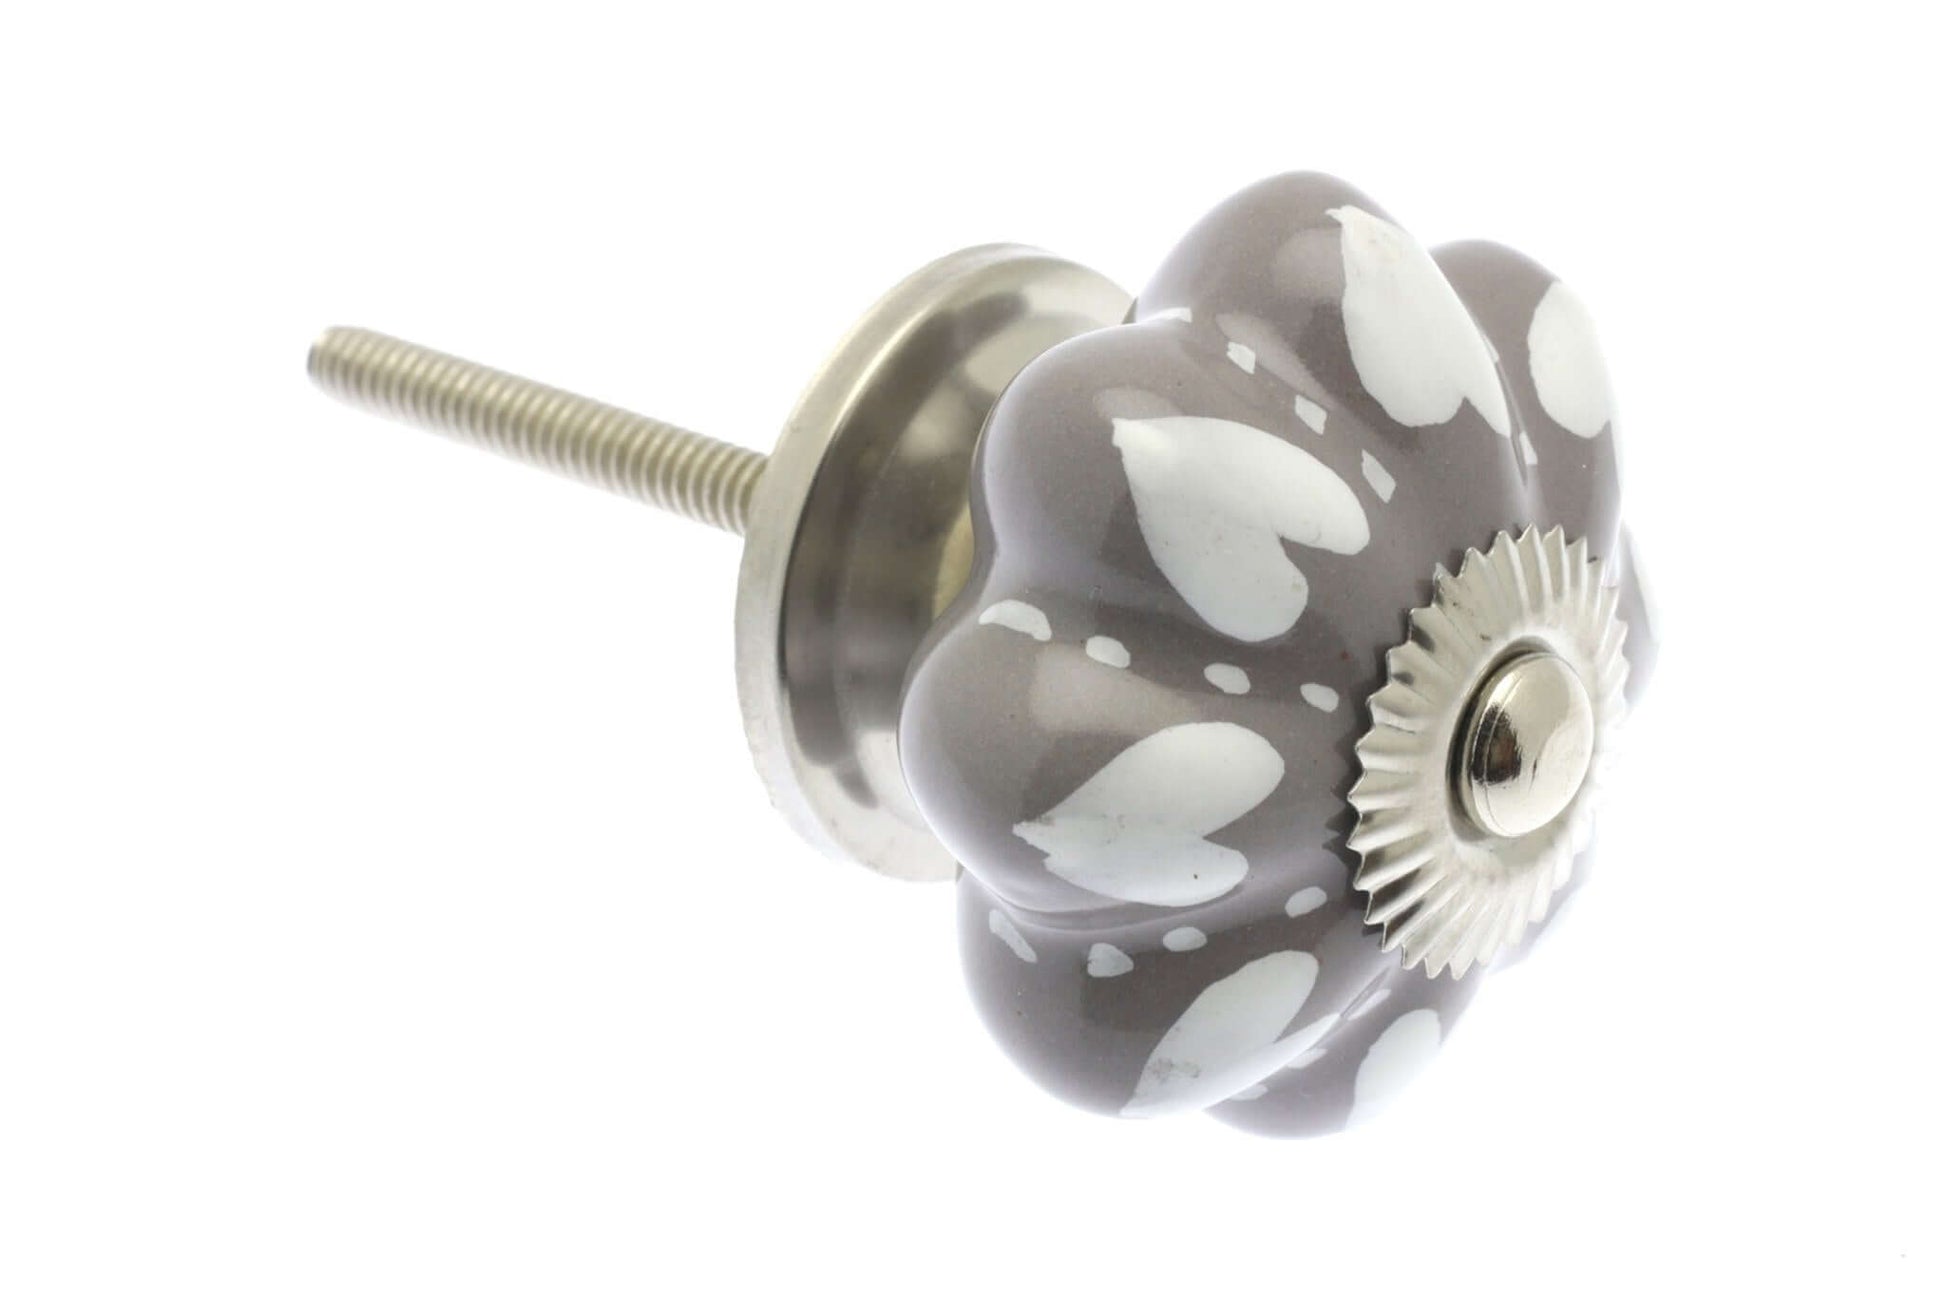 Ceramic Cupboard Knobs - White Hearts And Dots On Grey 42mm Fan Shaped Ceramic Cupboard Knob - Chrome Base & Fixings (EF-03-WGY)